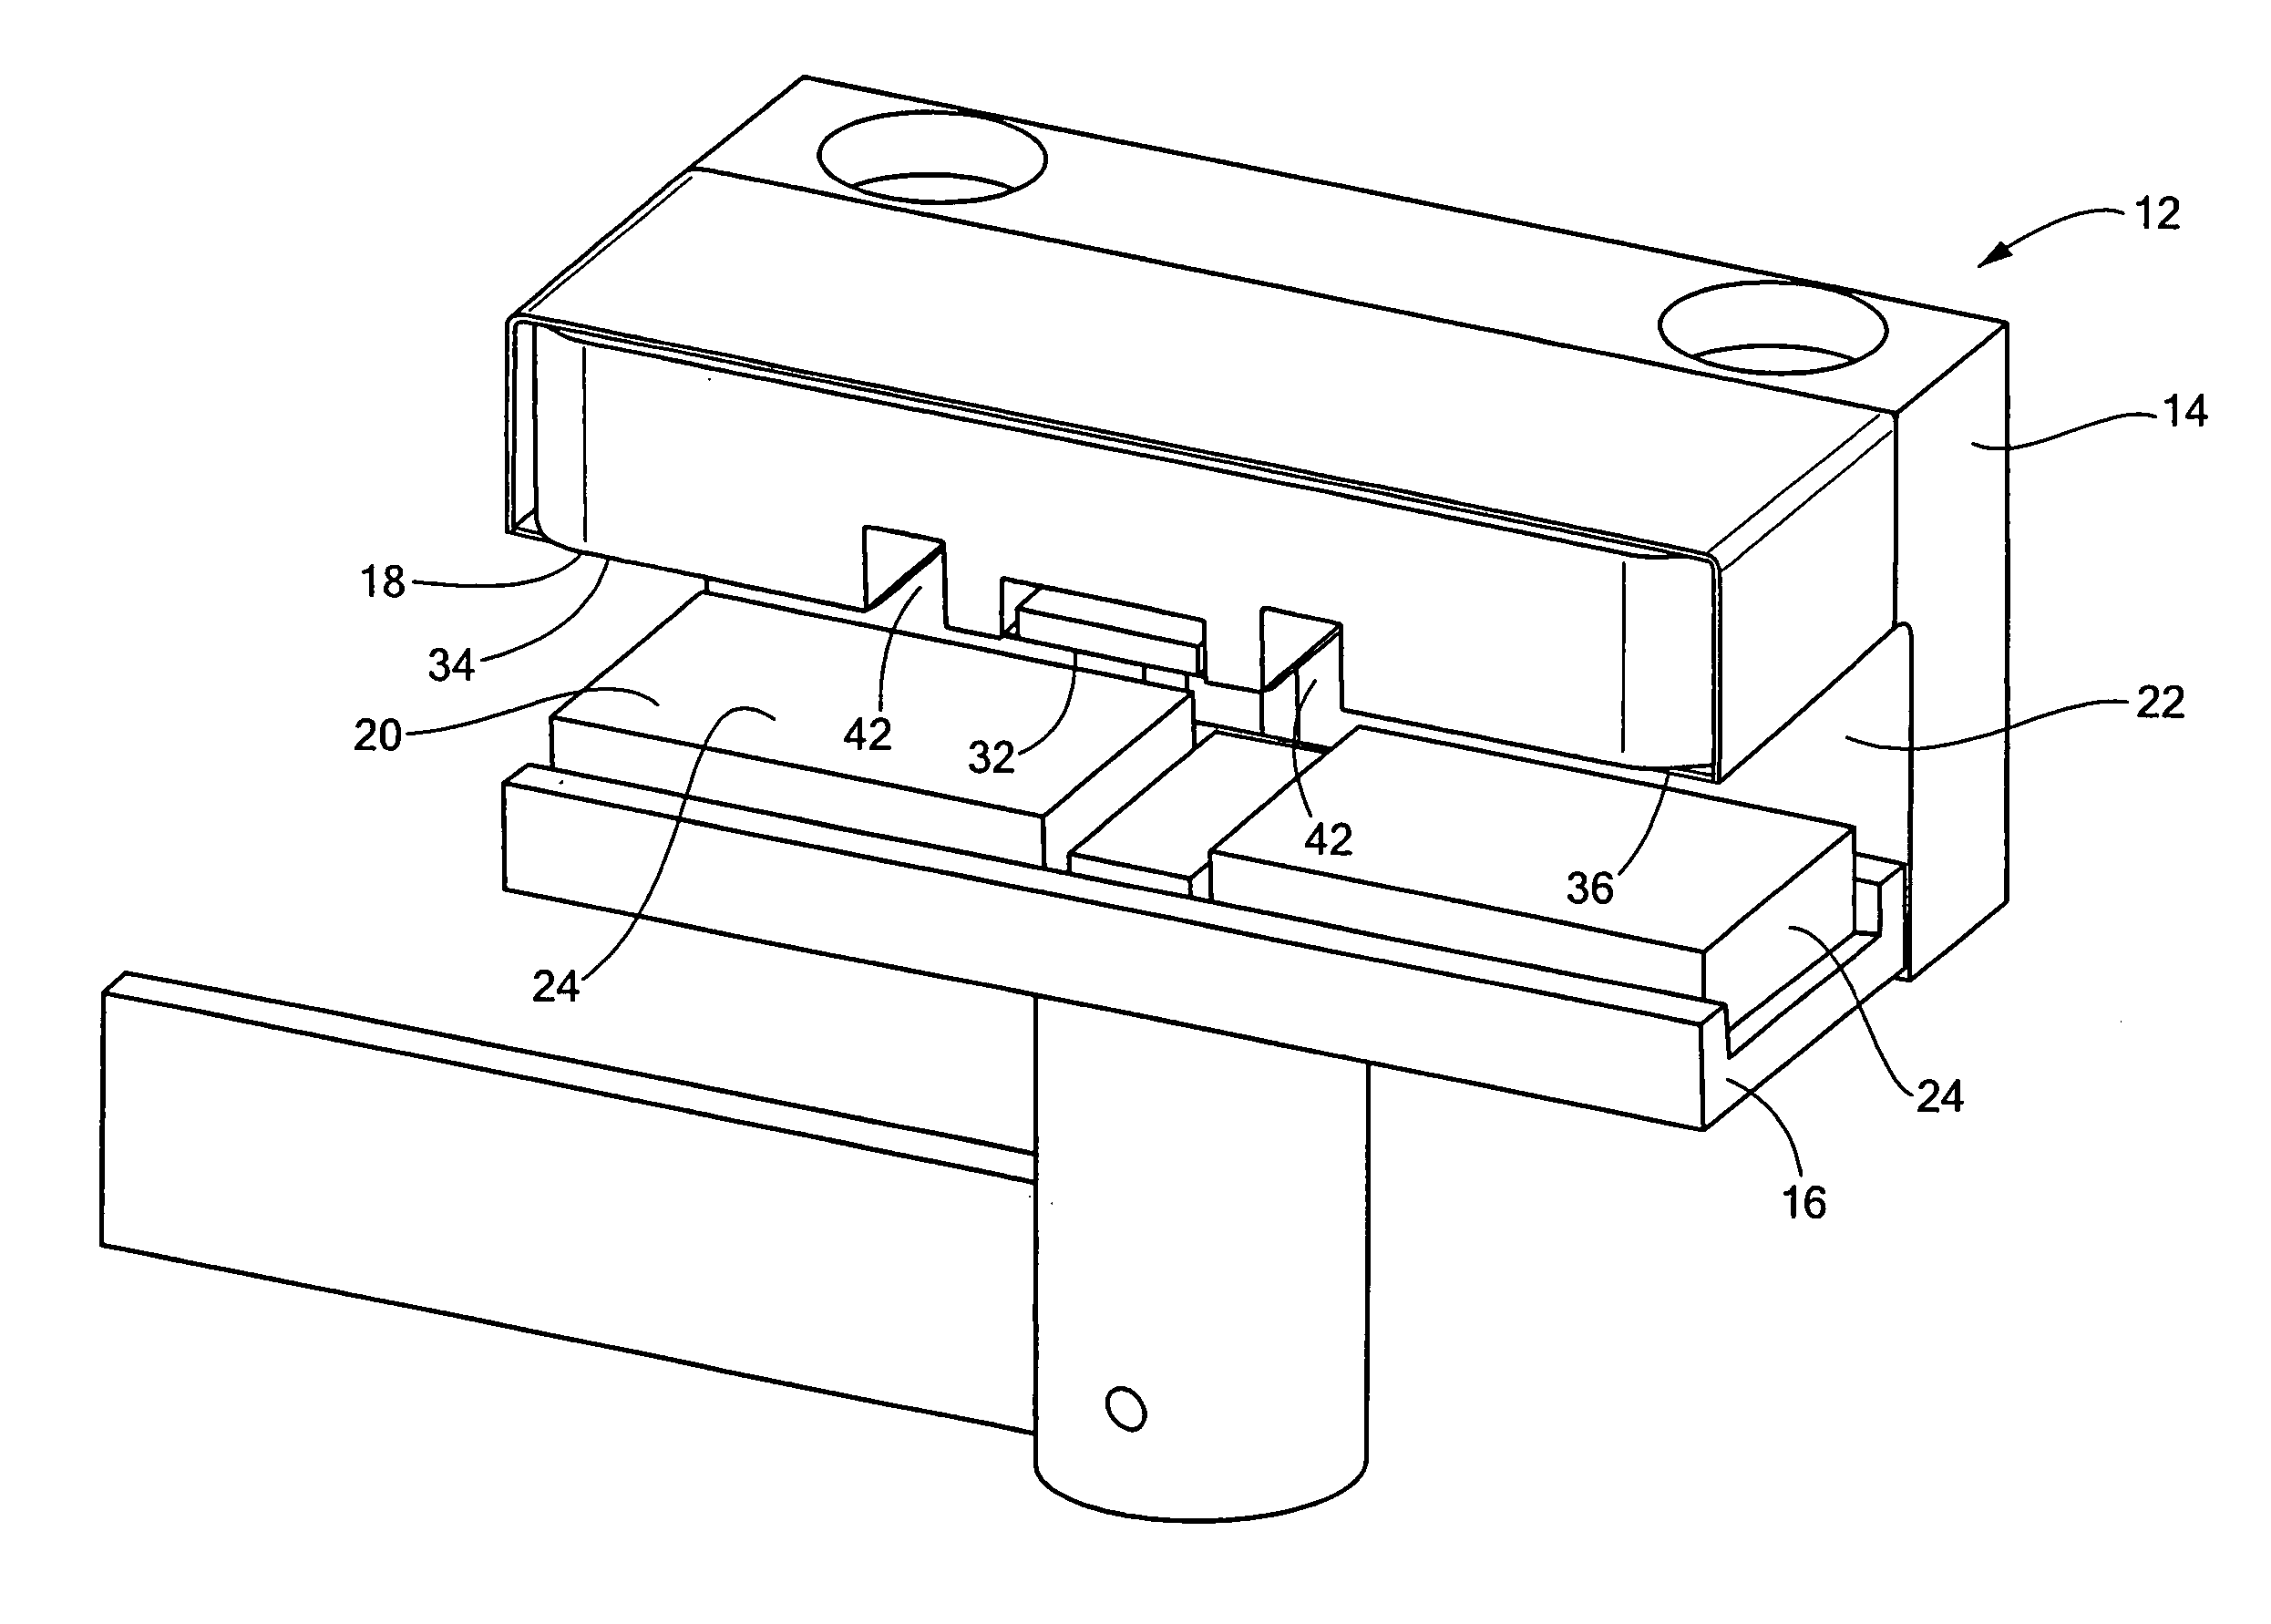 Flow control in an intravenous fluid delivery system